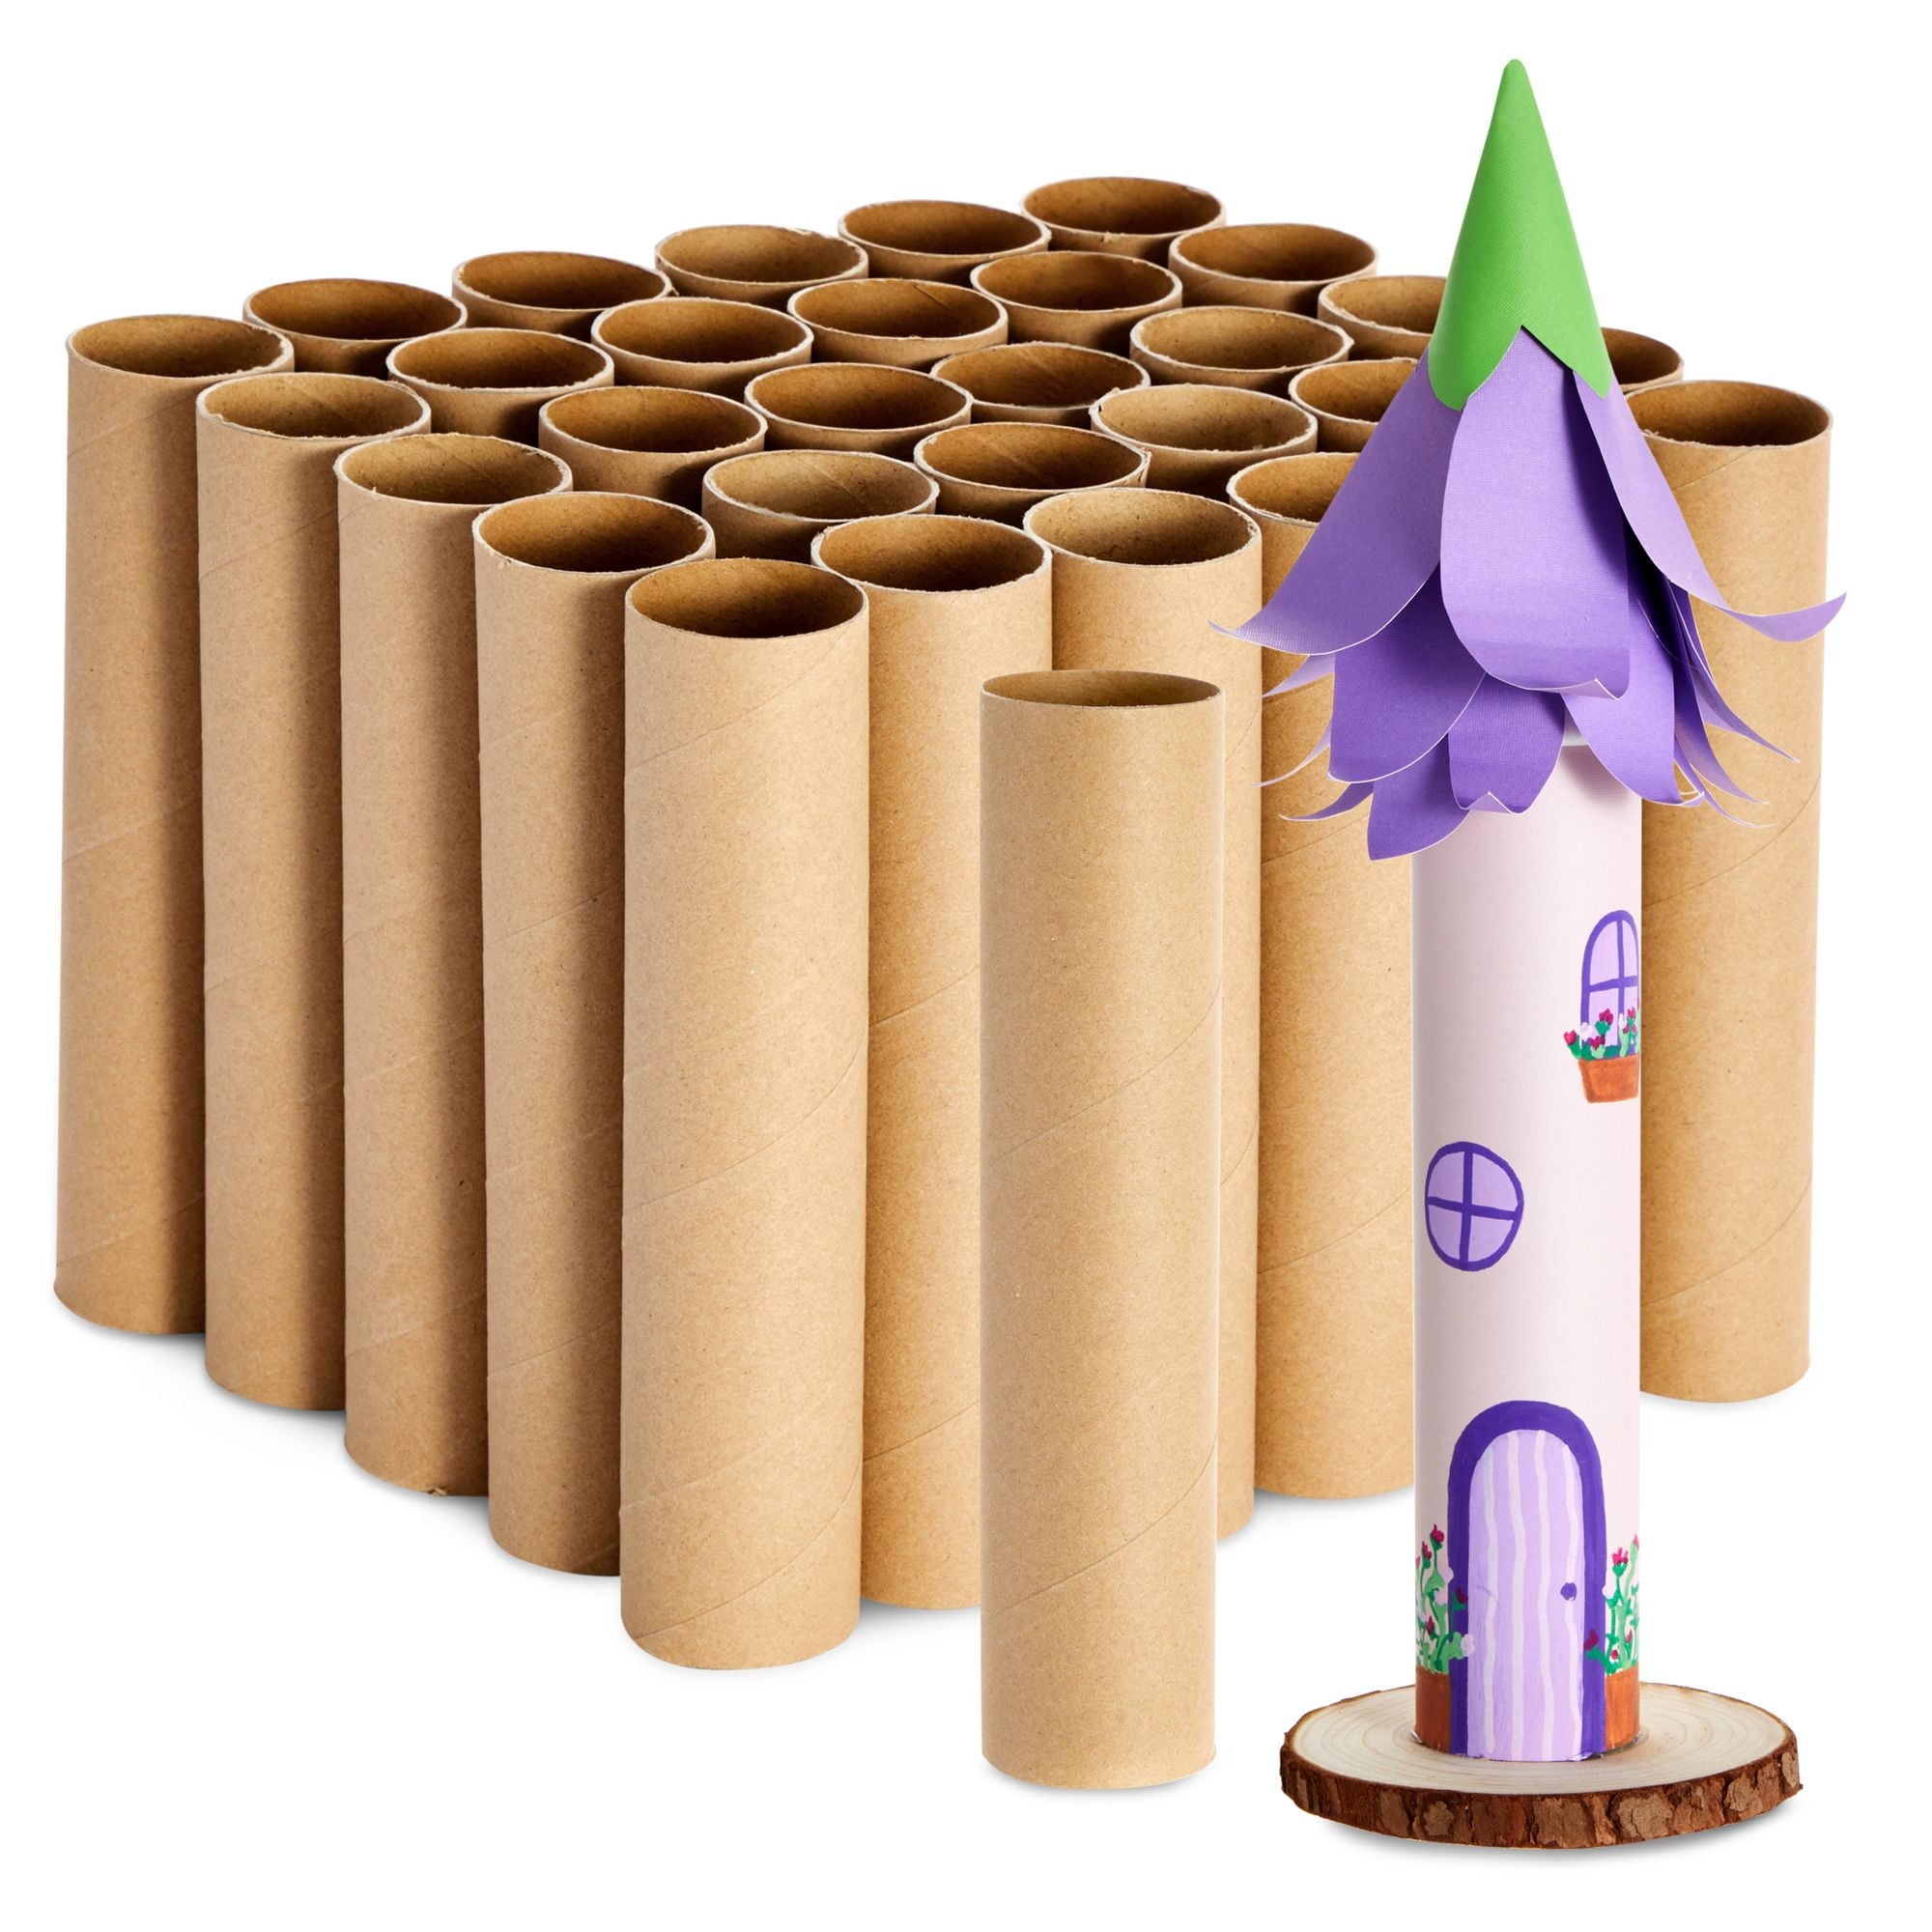 Neworkg 30 Pack Craft Roll - Cardboard Tubes for DIY Crafts,3.9 inches Tall